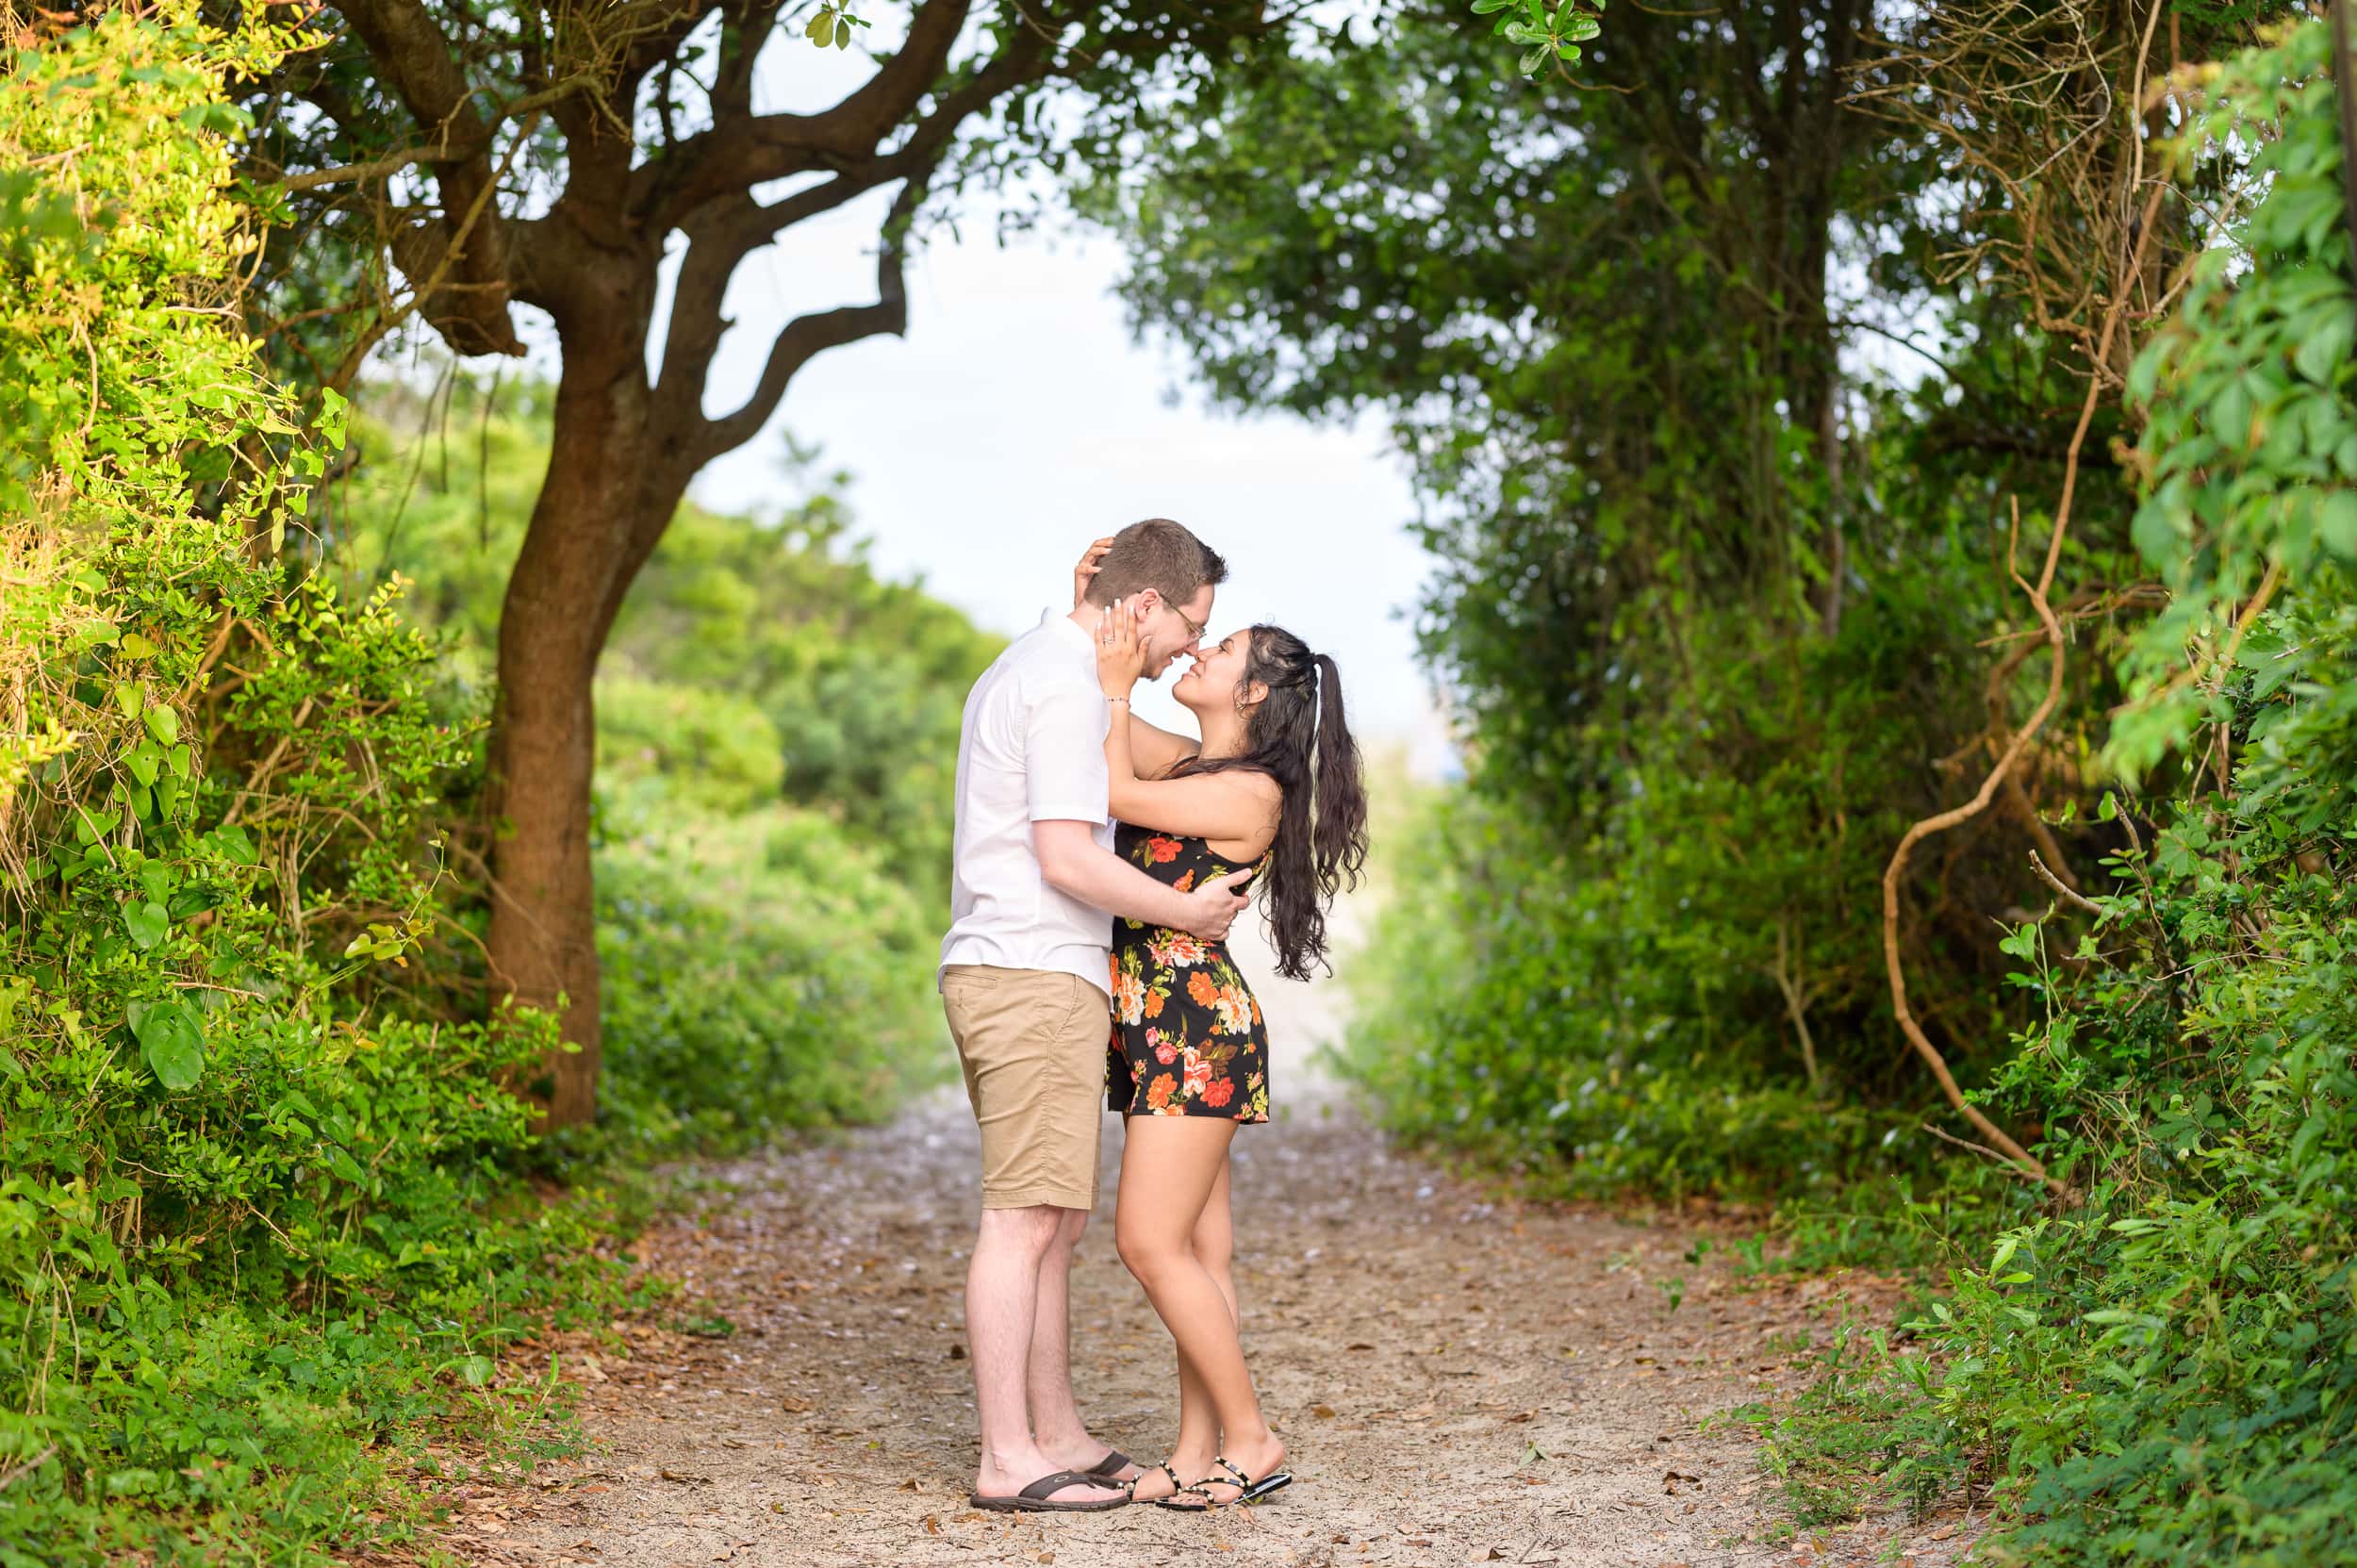 Pulling in for a kiss surrounded by the greenery on the beach walkway - Pawleys Island